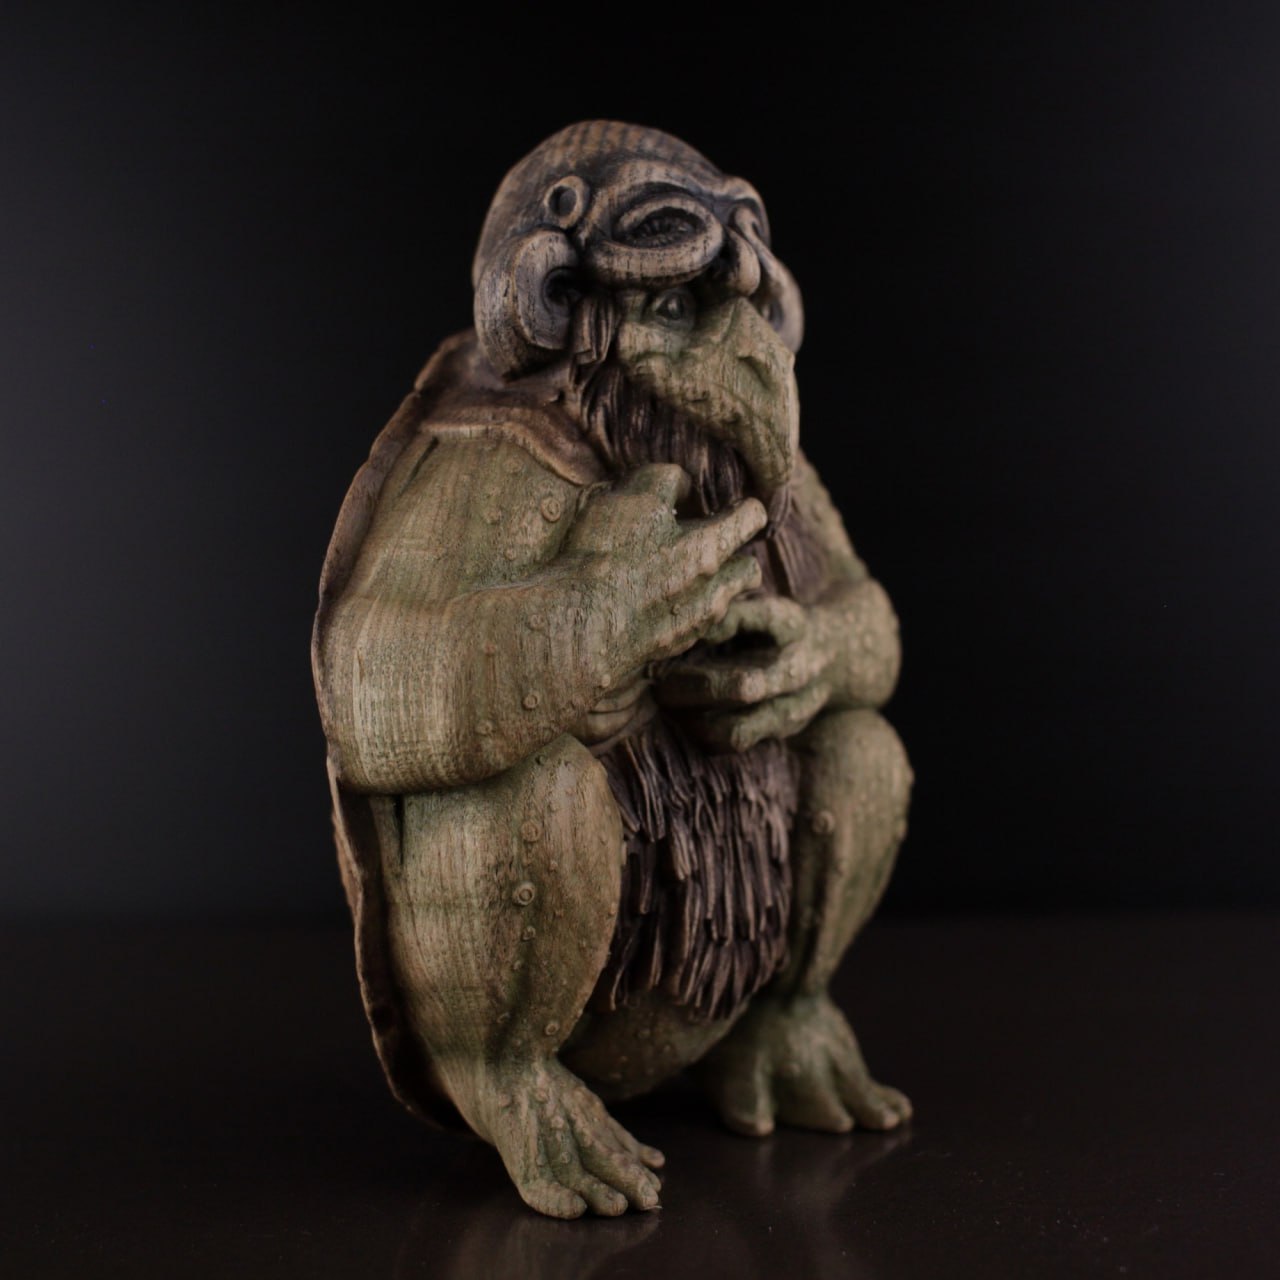 Exquisite Japanese Wooden Kappa Statue - Captivating Mythical Creature Artwork